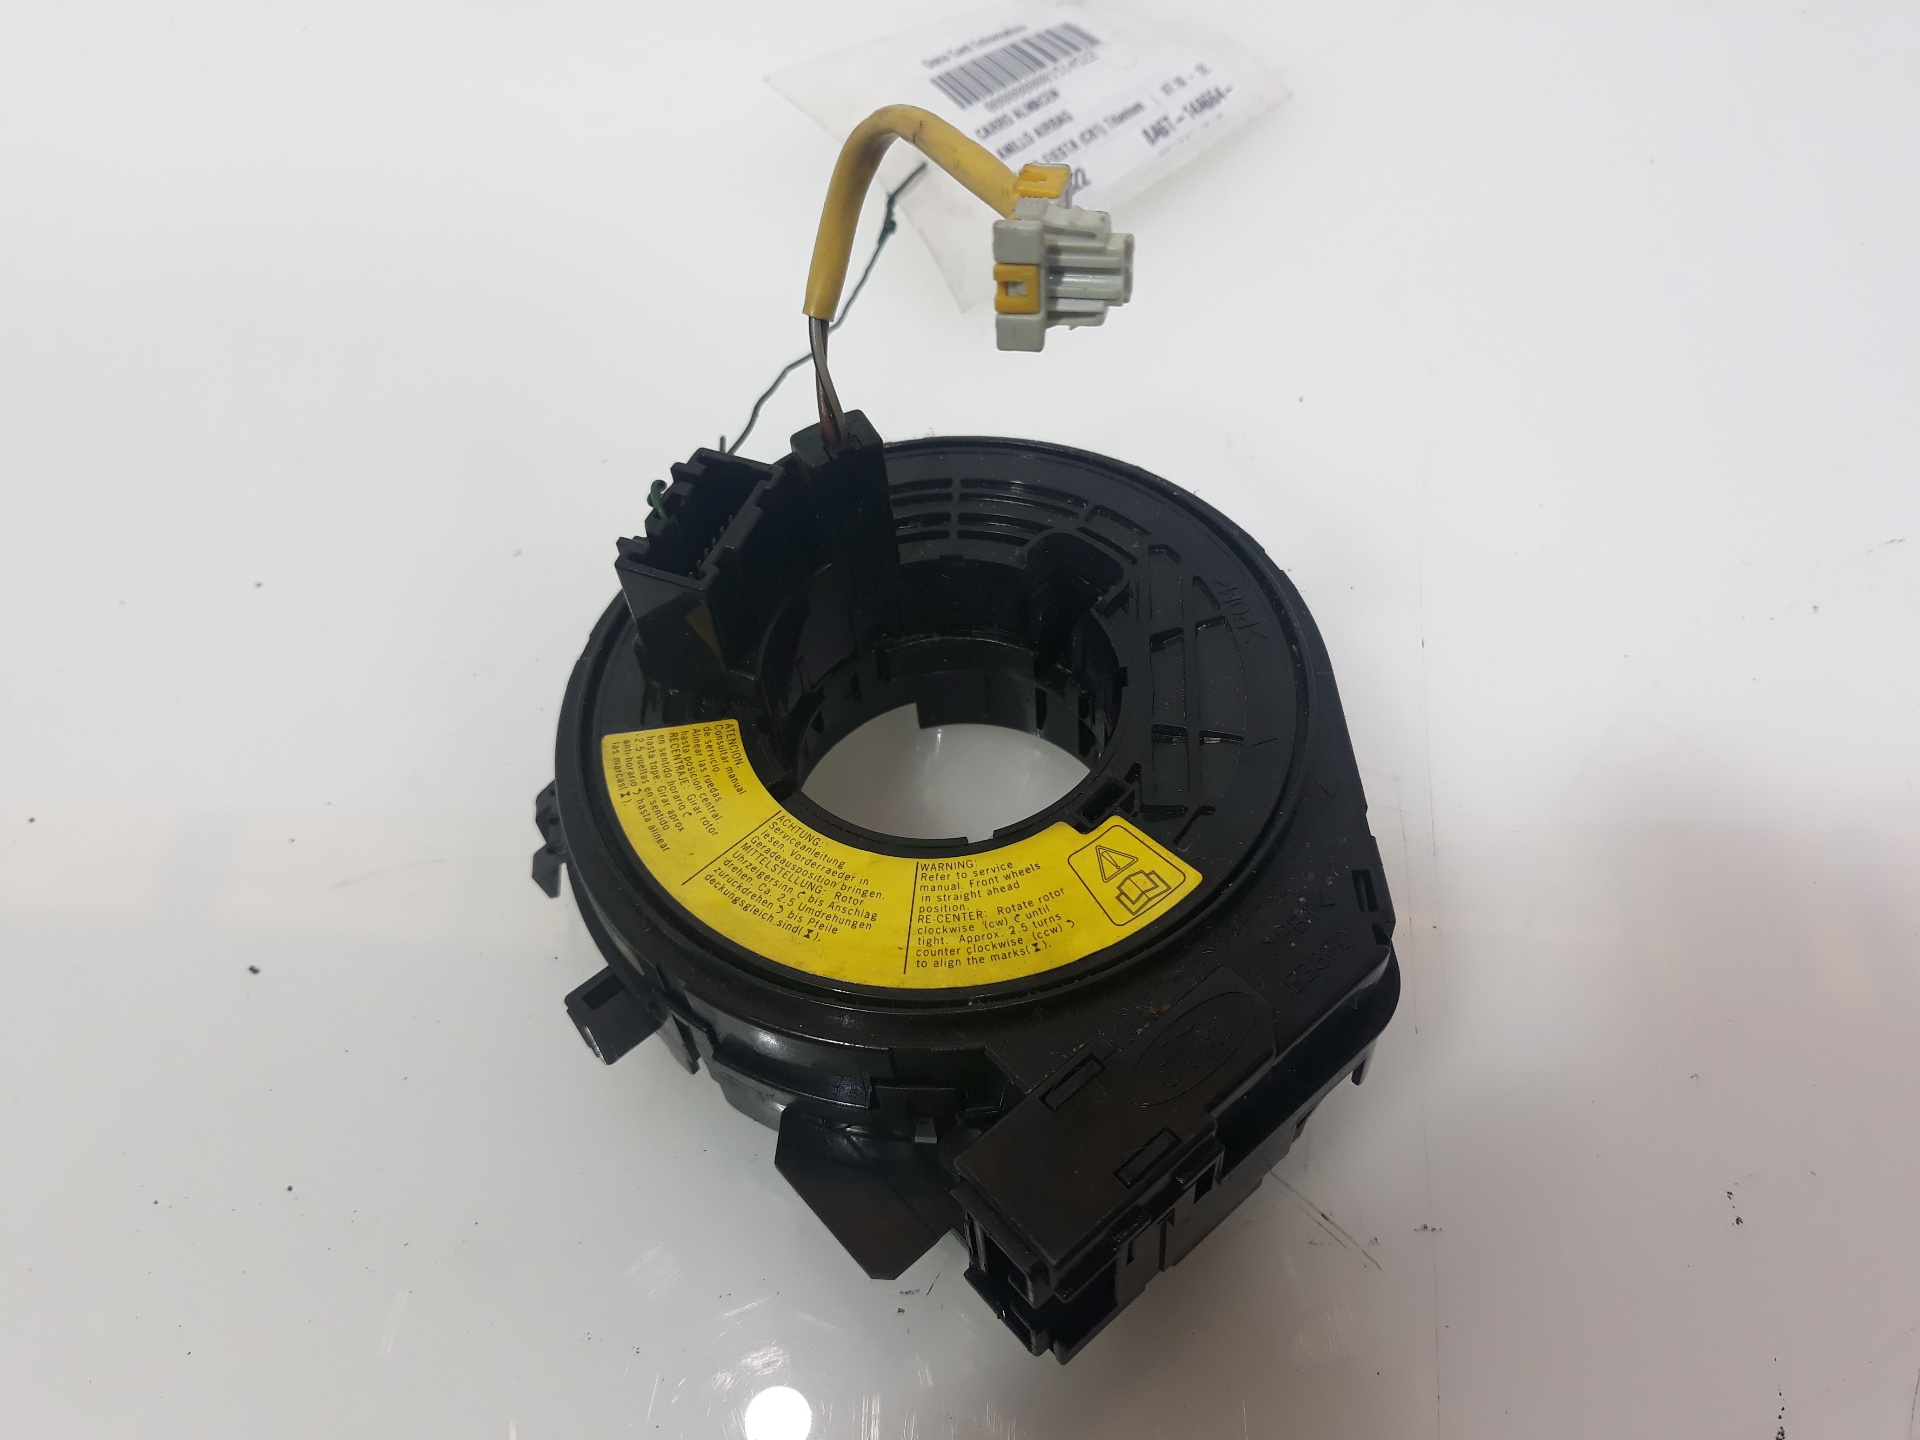 FORD Fiesta 5 generation (2001-2010) Steering Wheel Slip Ring Squib 8A6T-14A664-AD, 8A6T-14A664-AD 19167742